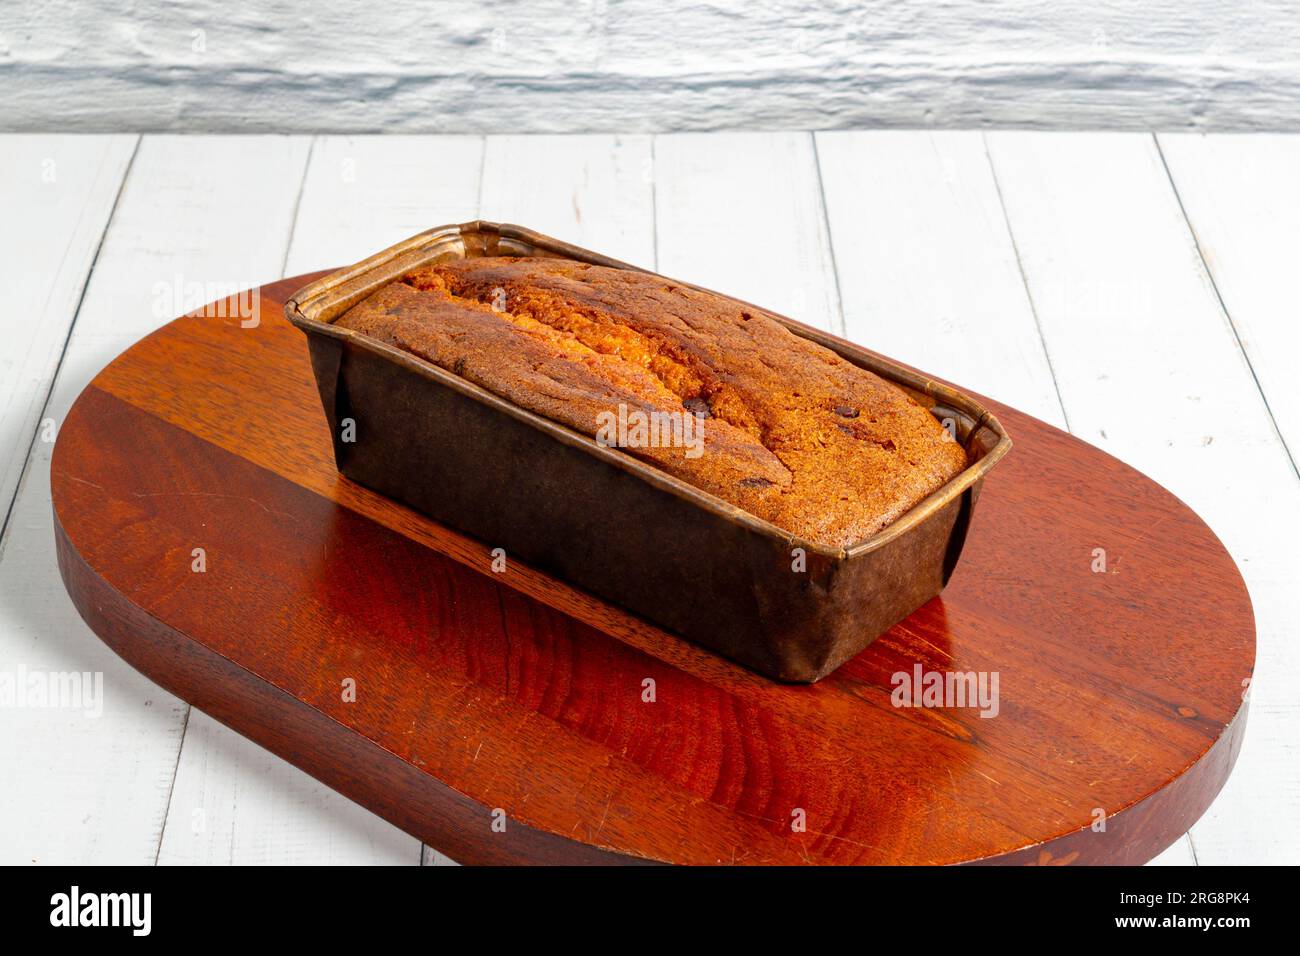 https://c8.alamy.com/comp/2RG8PK4/an-english-cake-in-a-baking-dish-on-a-wooden-board-and-a-white-wooden-table-selective-focus-2RG8PK4.jpg